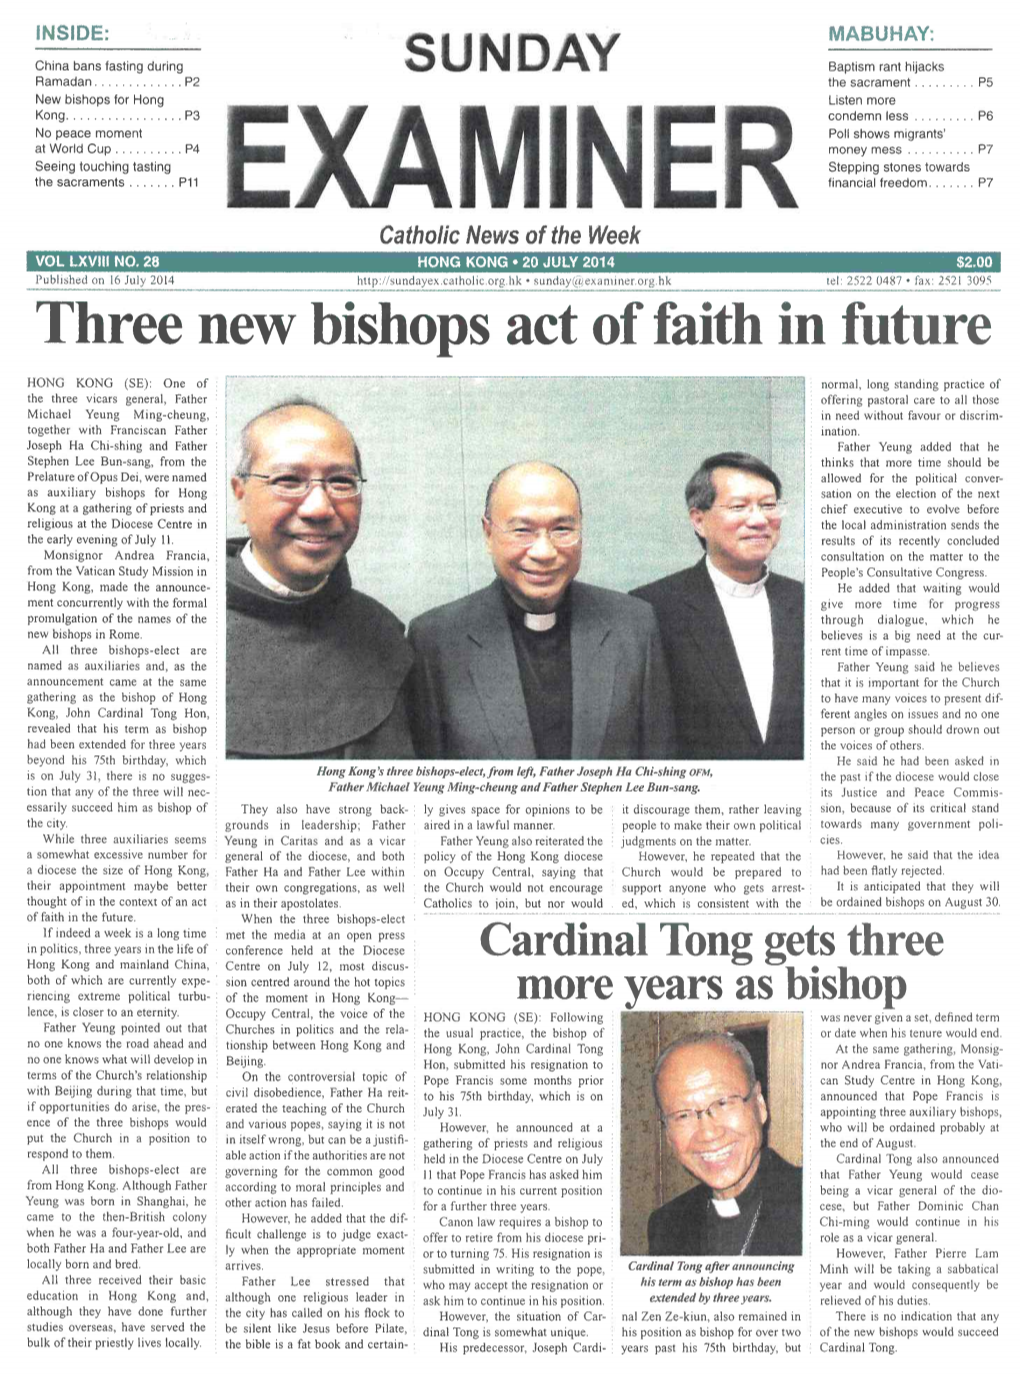 Three New Bishops Act of Faith in Future